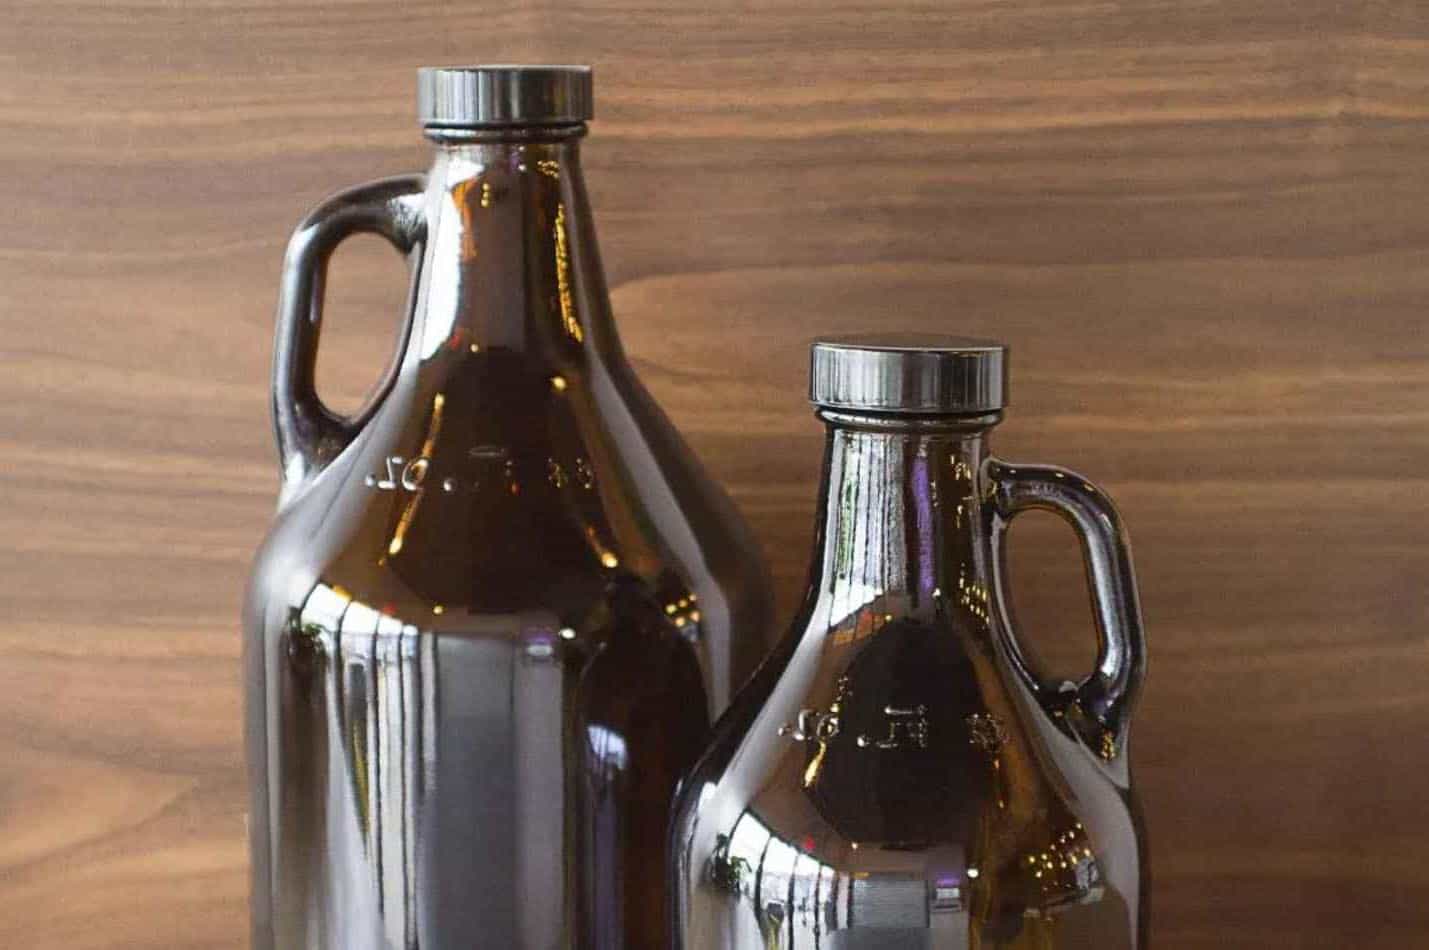 What Is a Growler